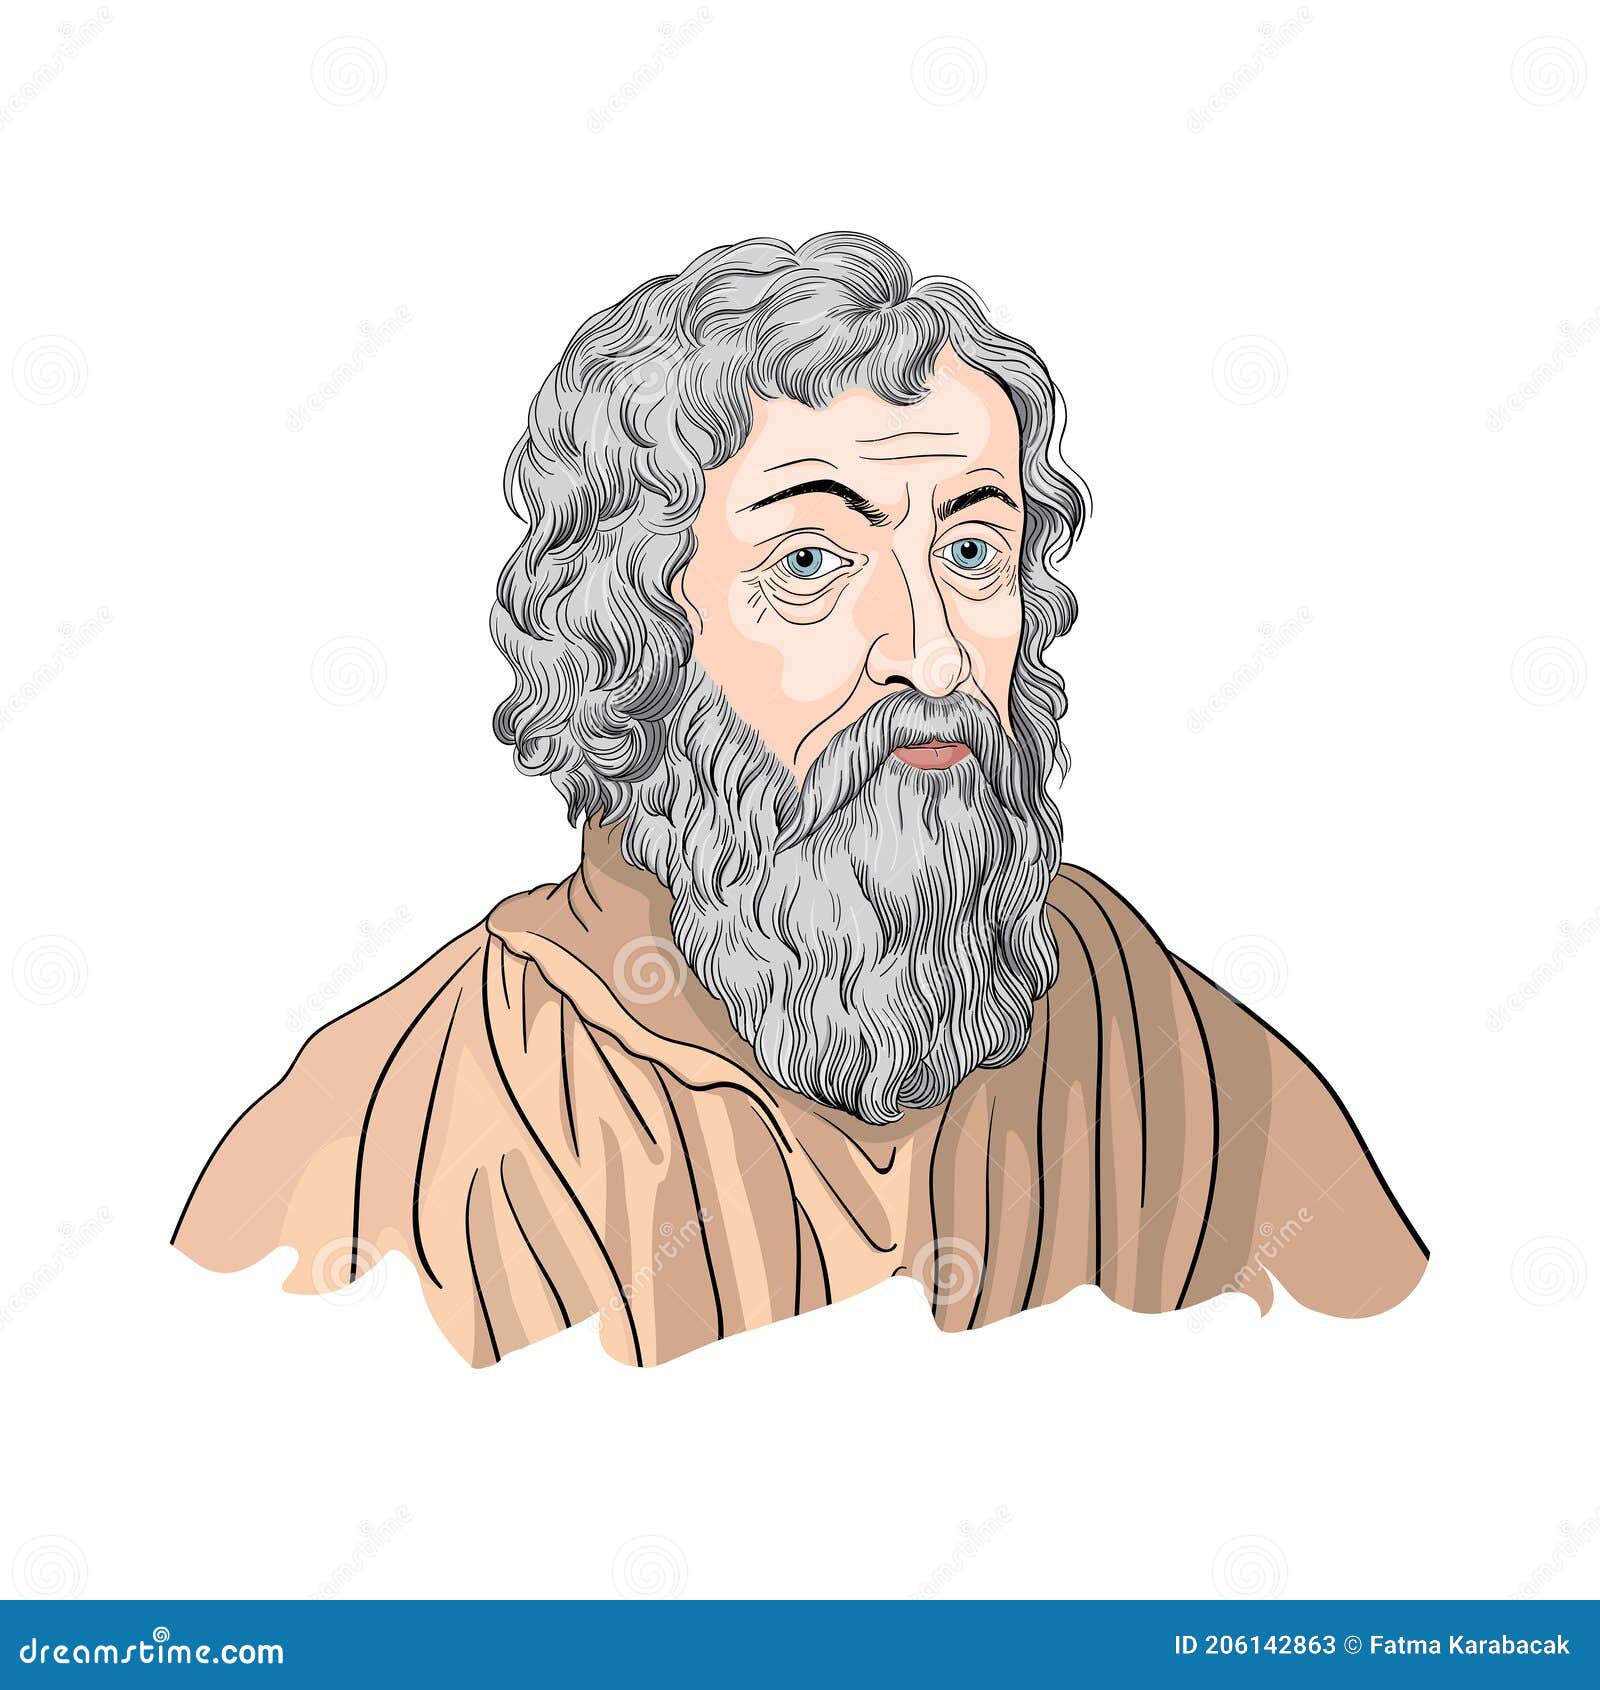 hippocrates, ancient greek physician who lived during greece`s classical period and is traditionally regarded as the father of med